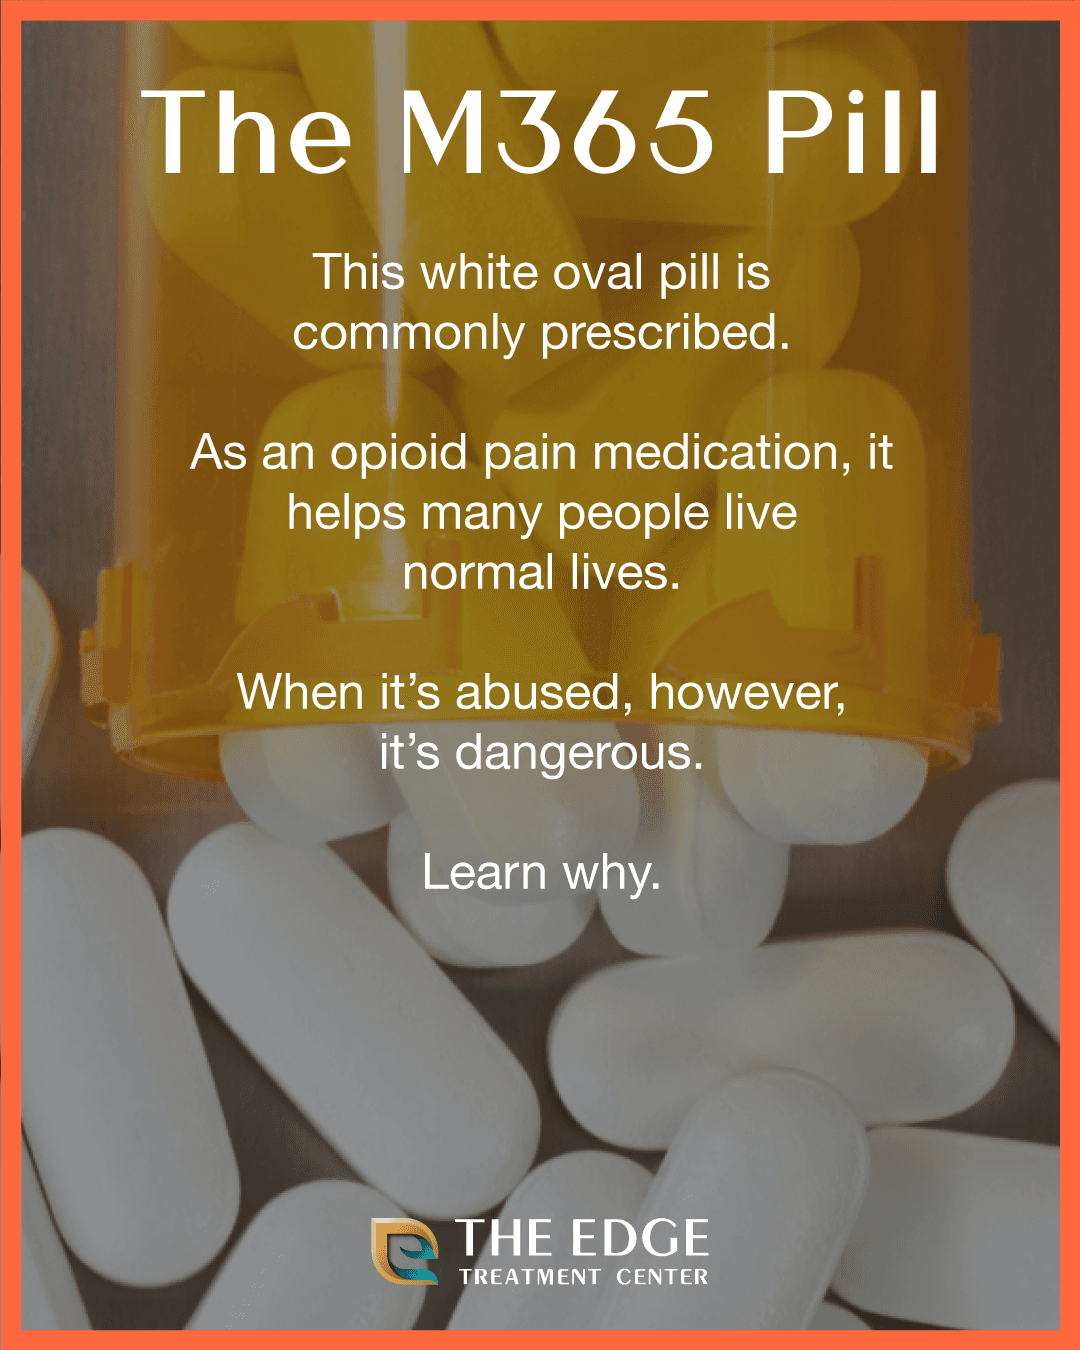 M365 Pill: What Is it?